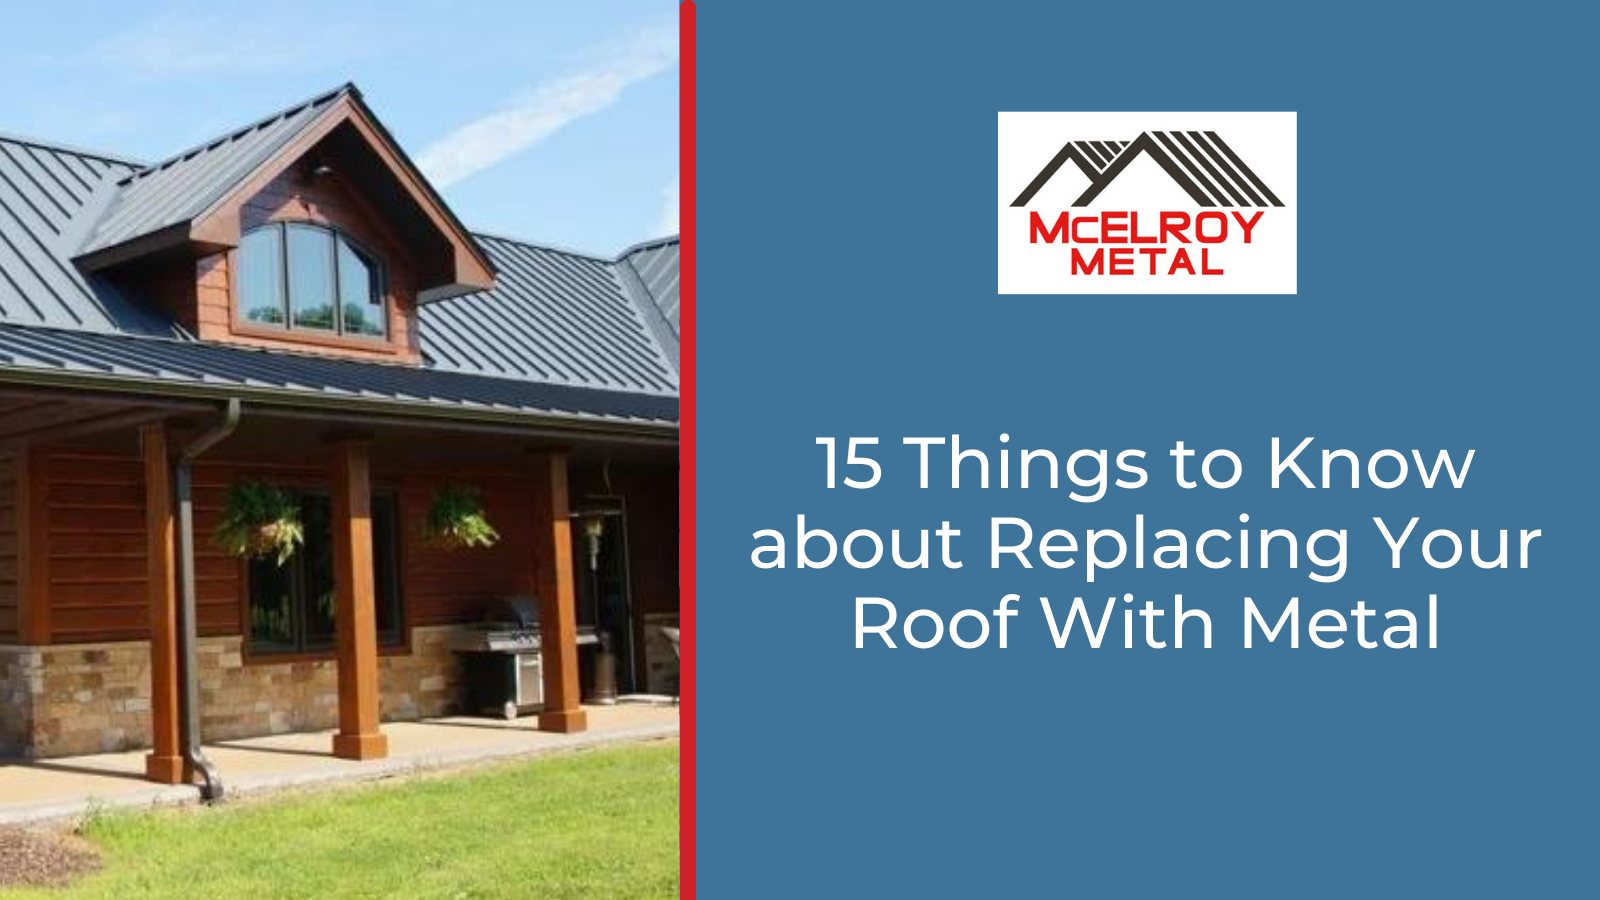 15 Things to Know about Replacing Your Roof With Metal